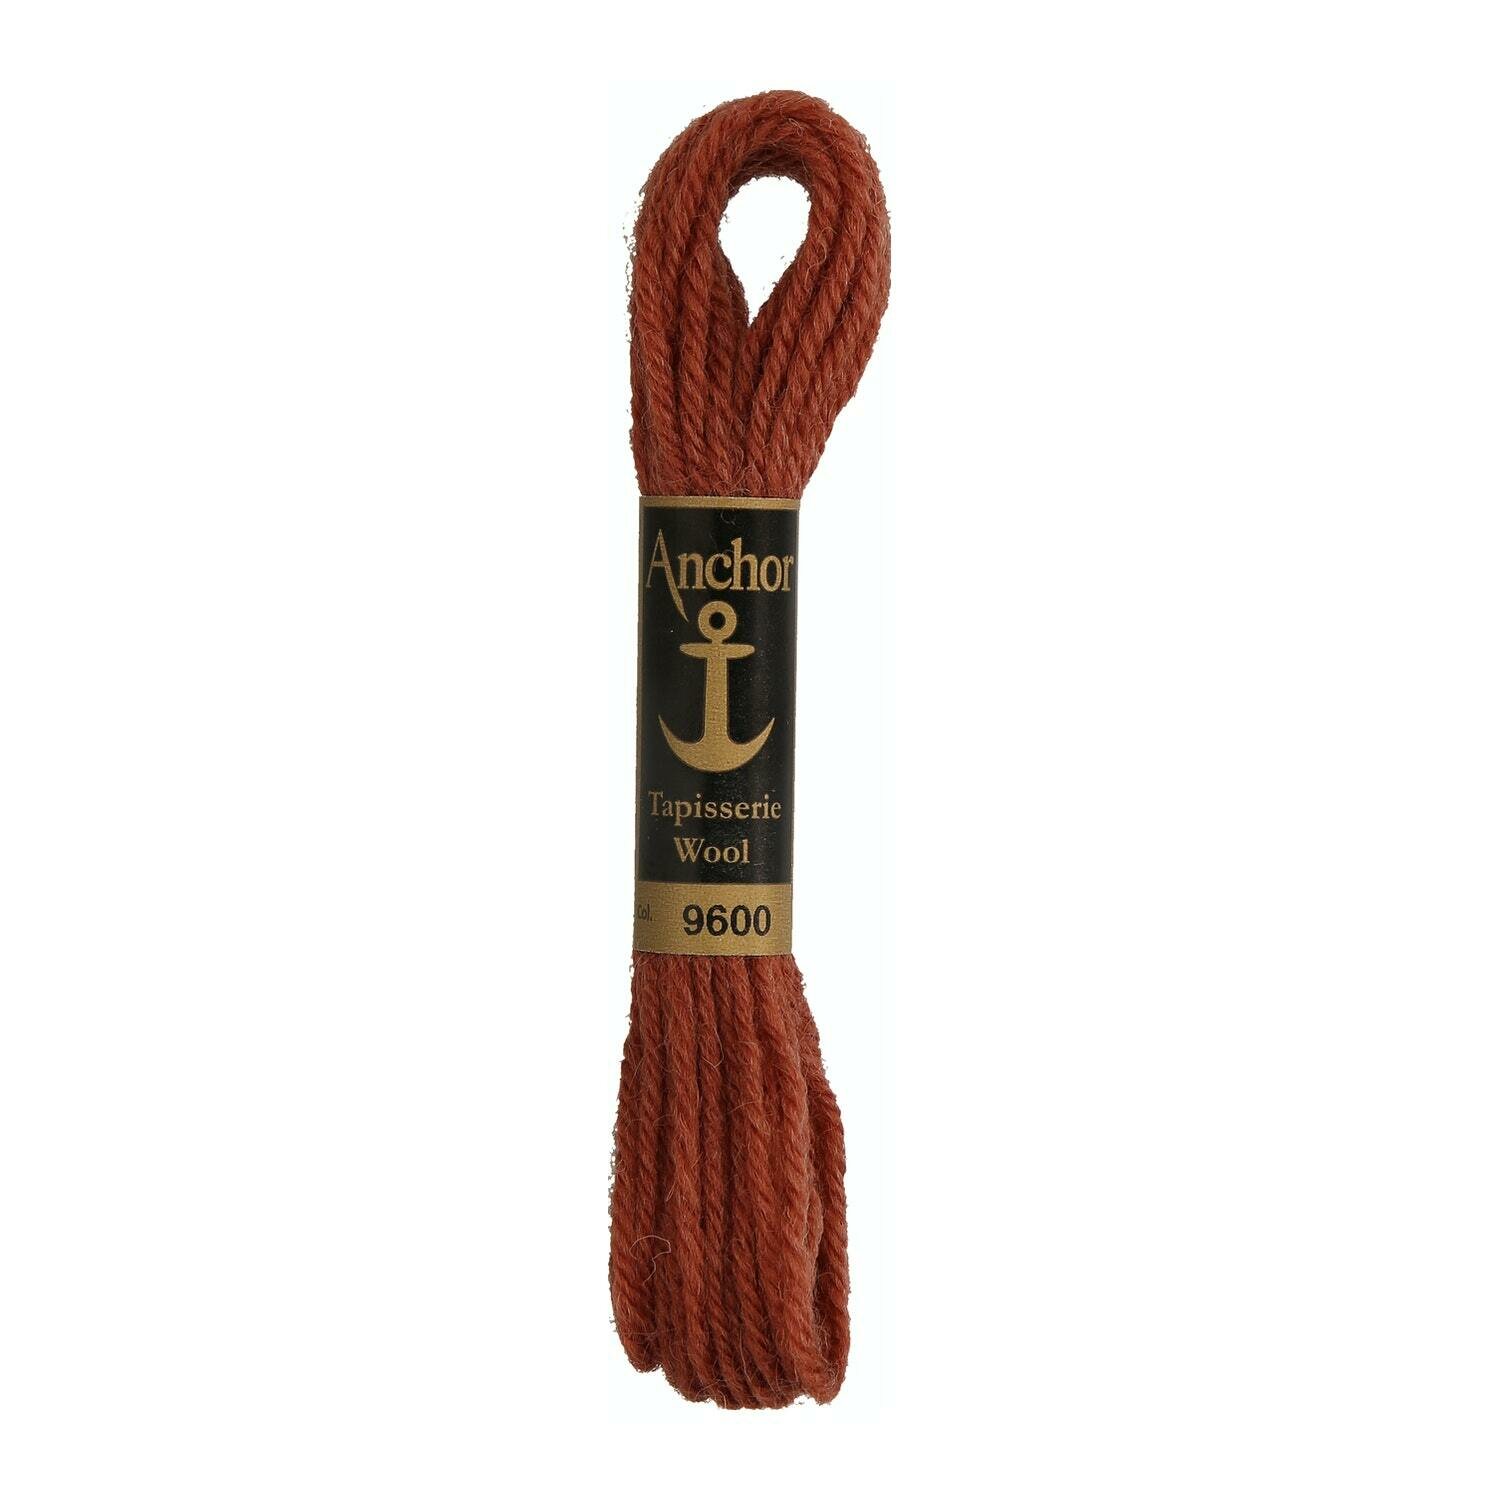 Anchor Tapisserie Wool # 09600